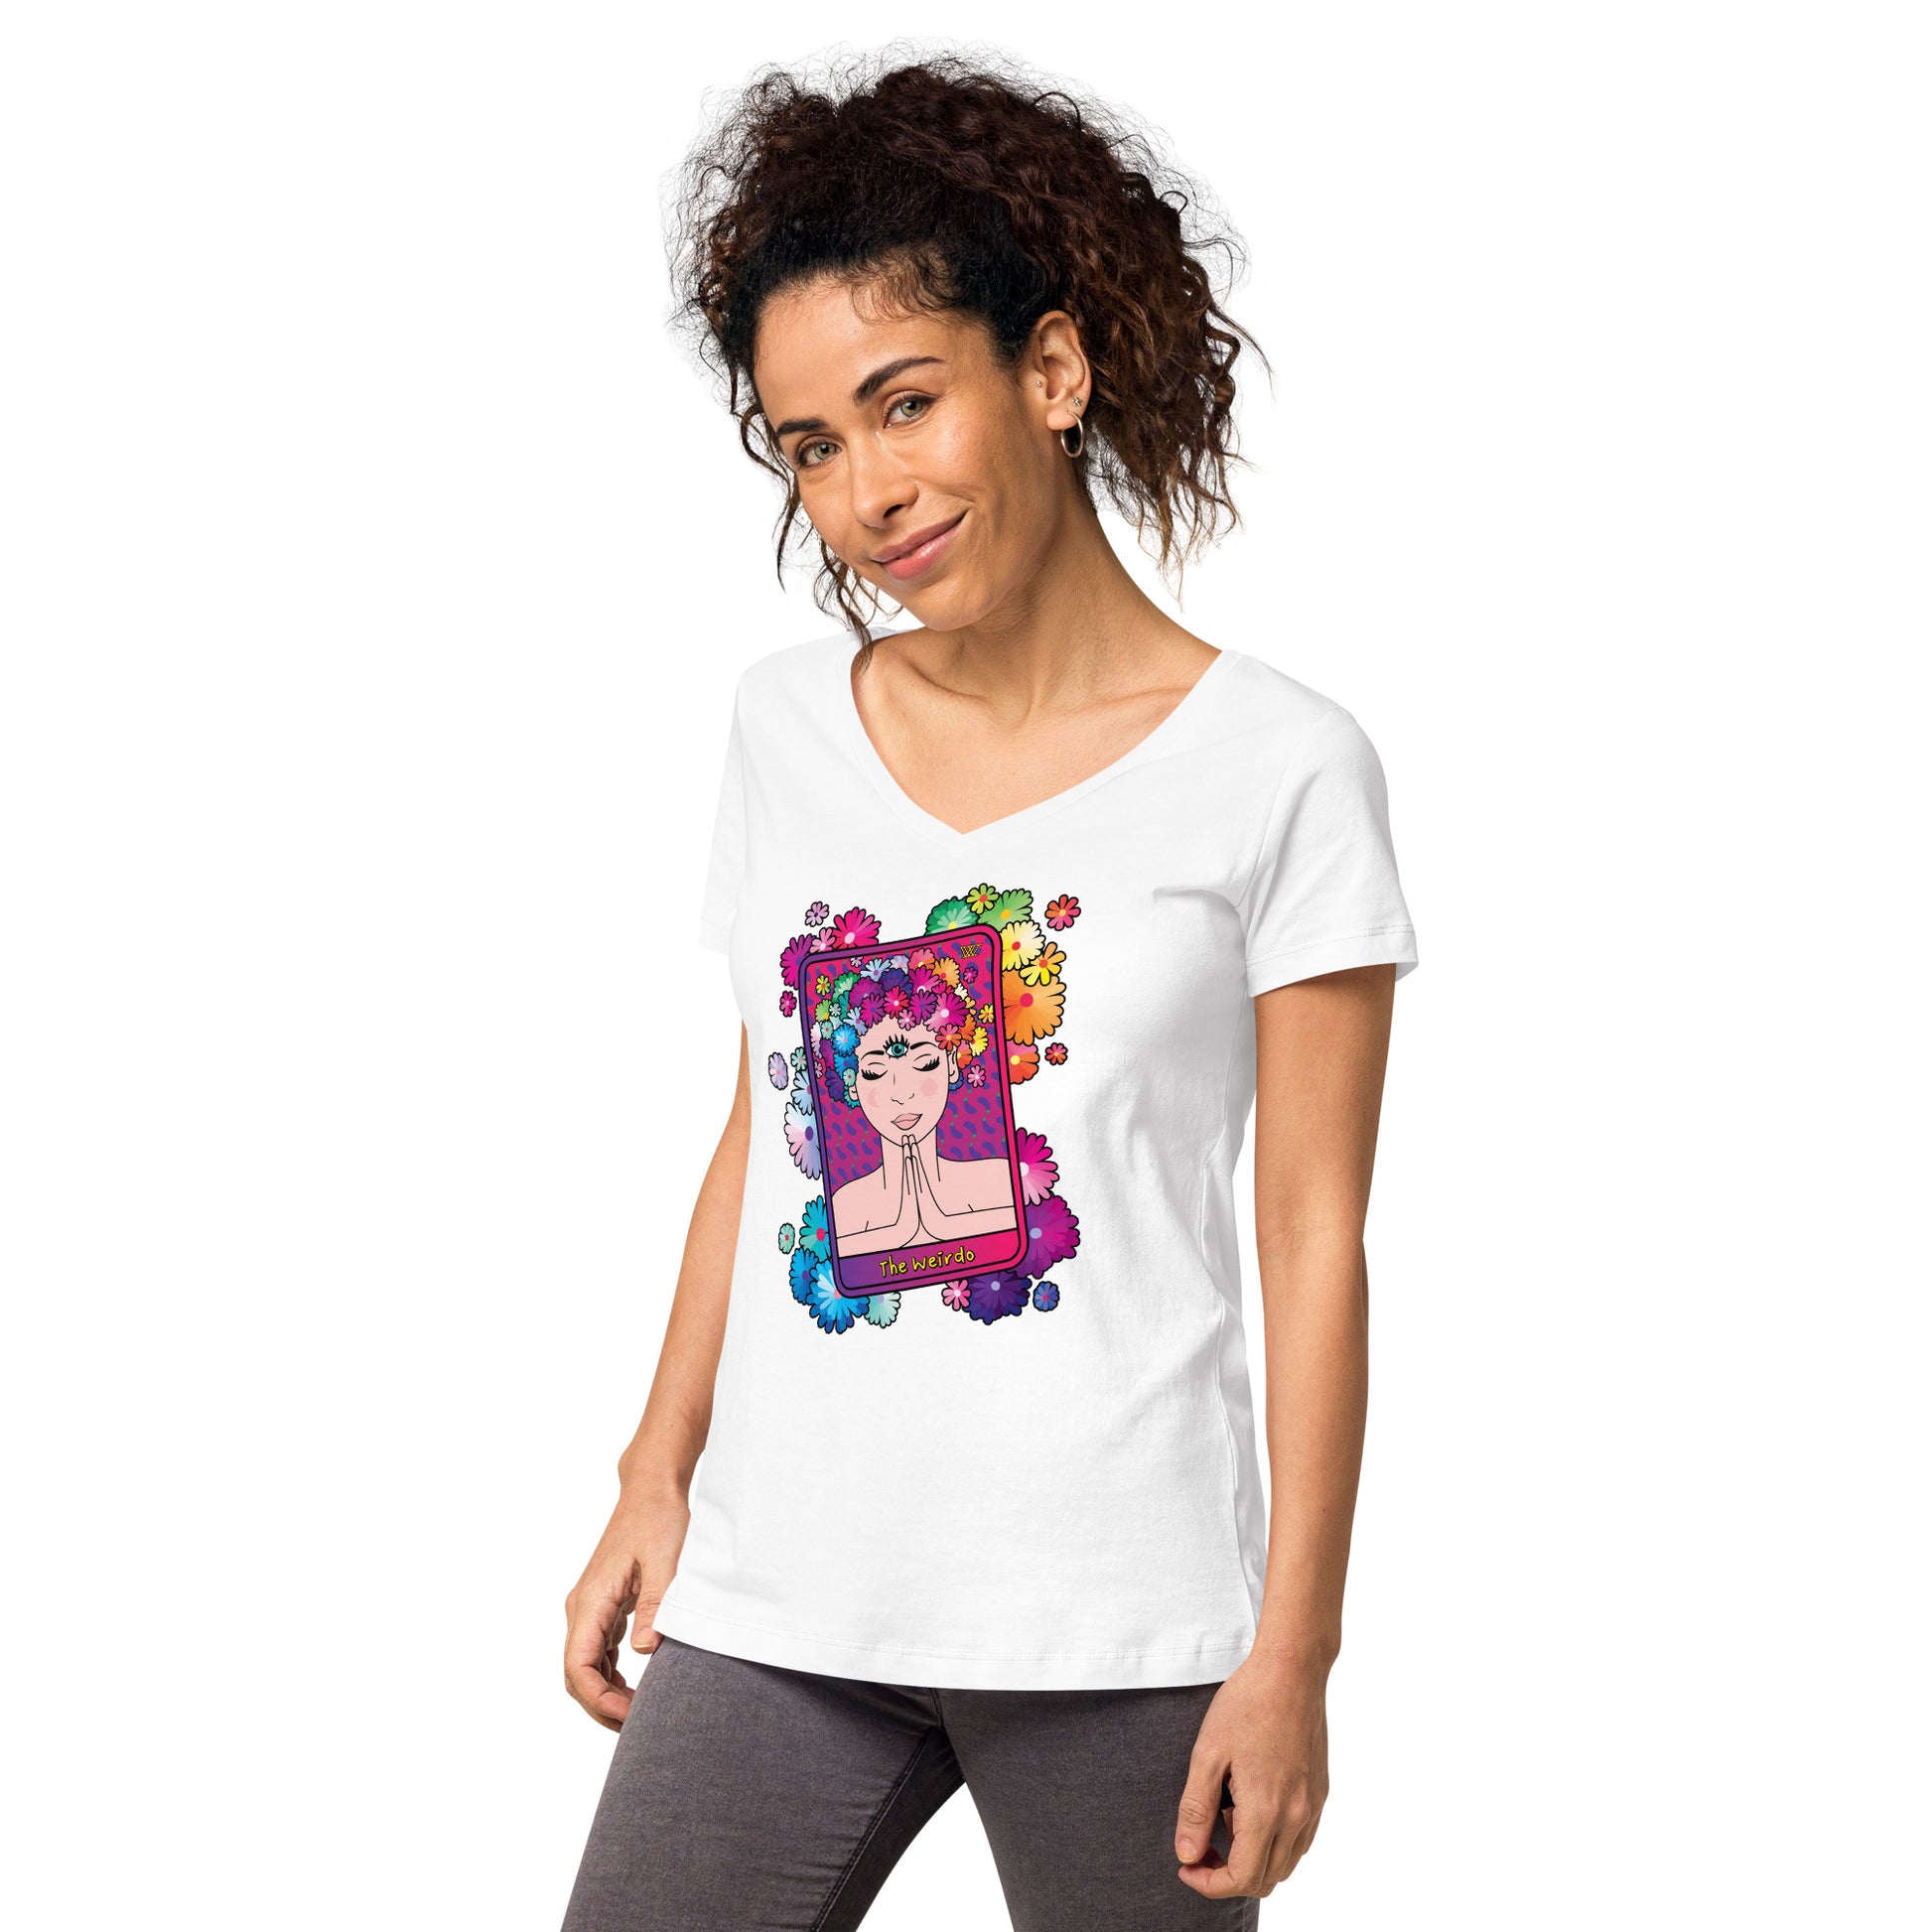 #WEIRDO | This awesome T-shirt for women has a Tarot Card printed at the front of the shirt. The Tarot Card printed here is 'The Weirdo.' Are you a weirdo for reading Tarot?